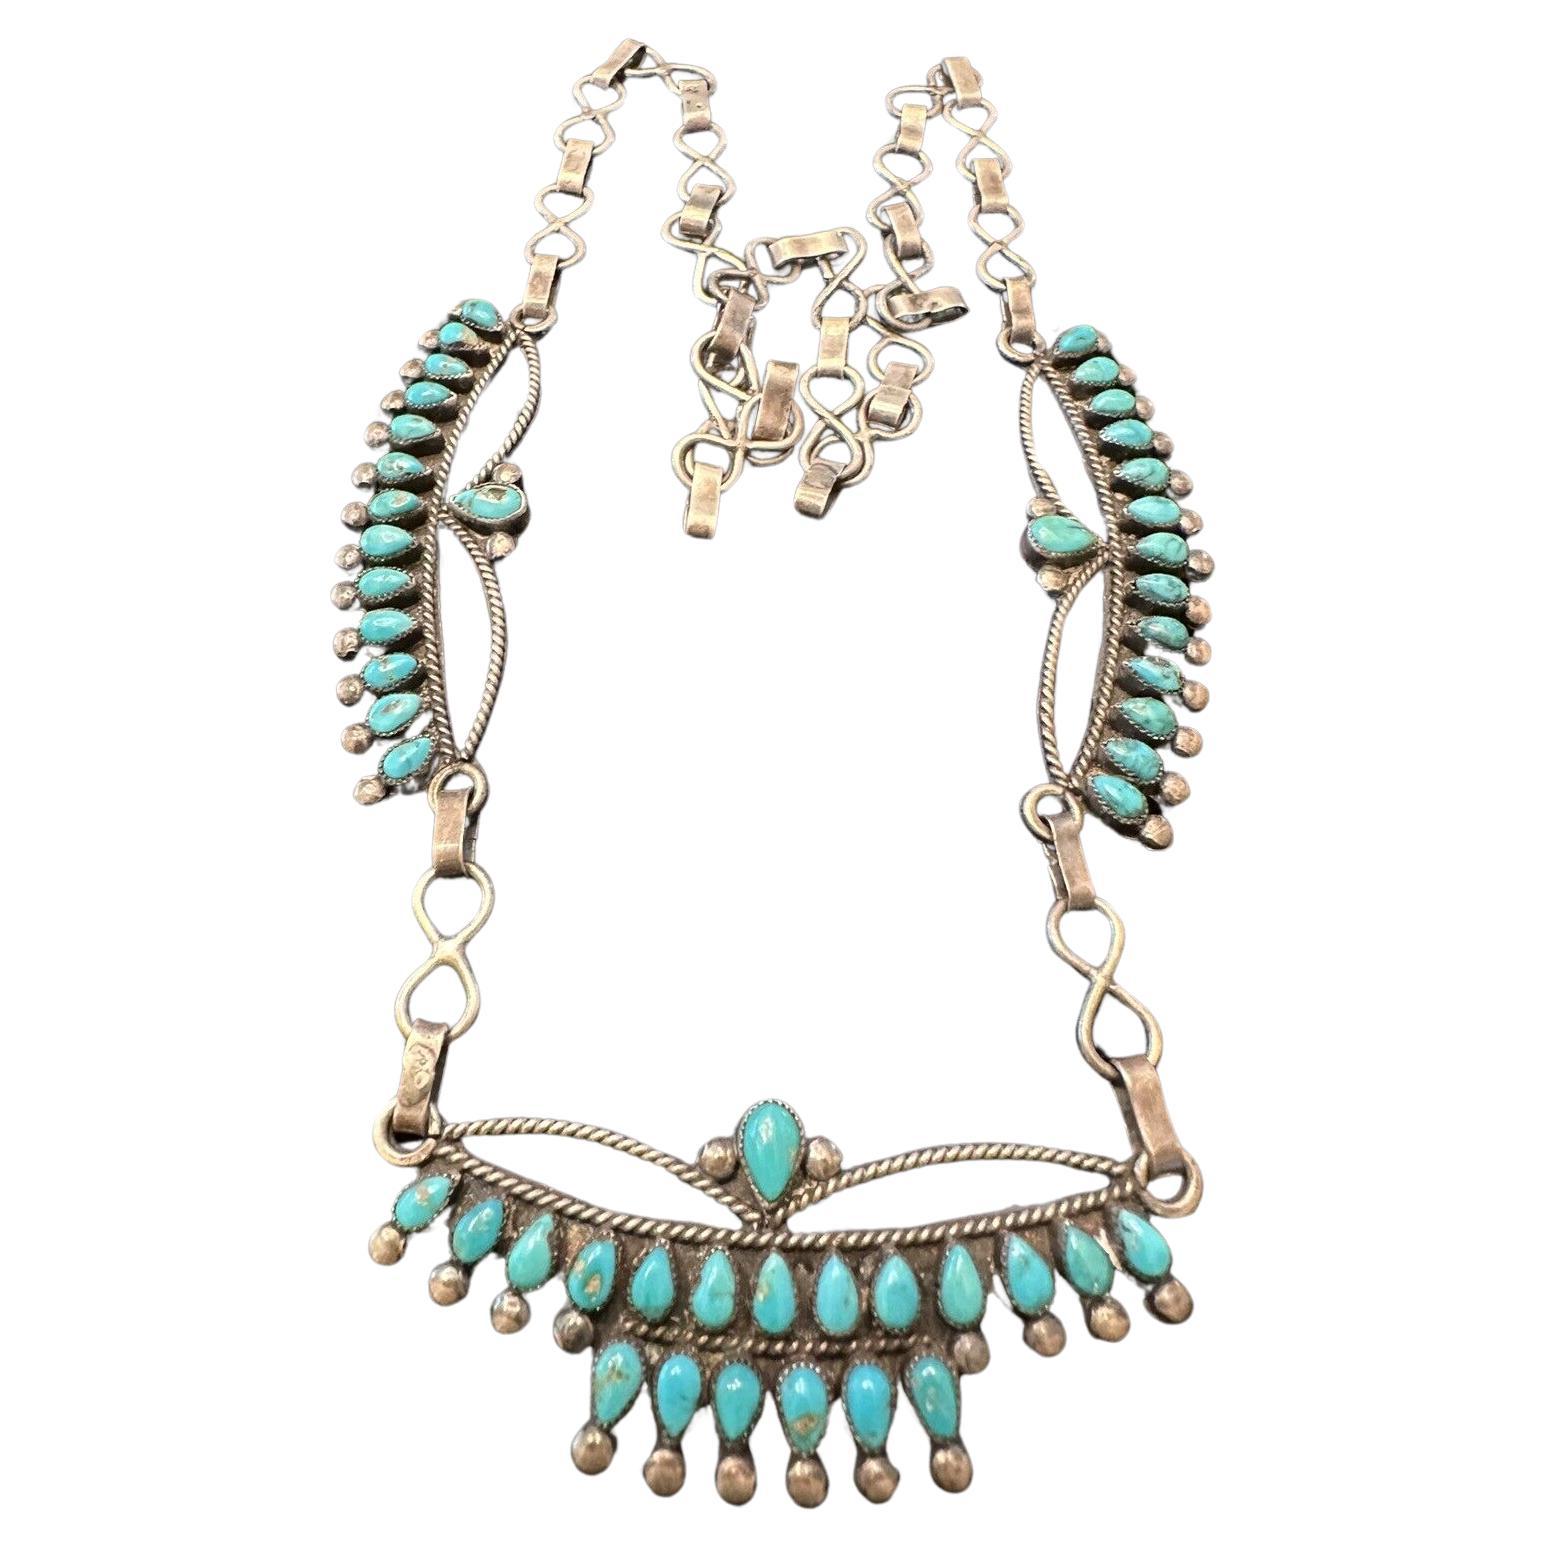 Western Style Squash Blossom Necklace - Turquoise/Silver